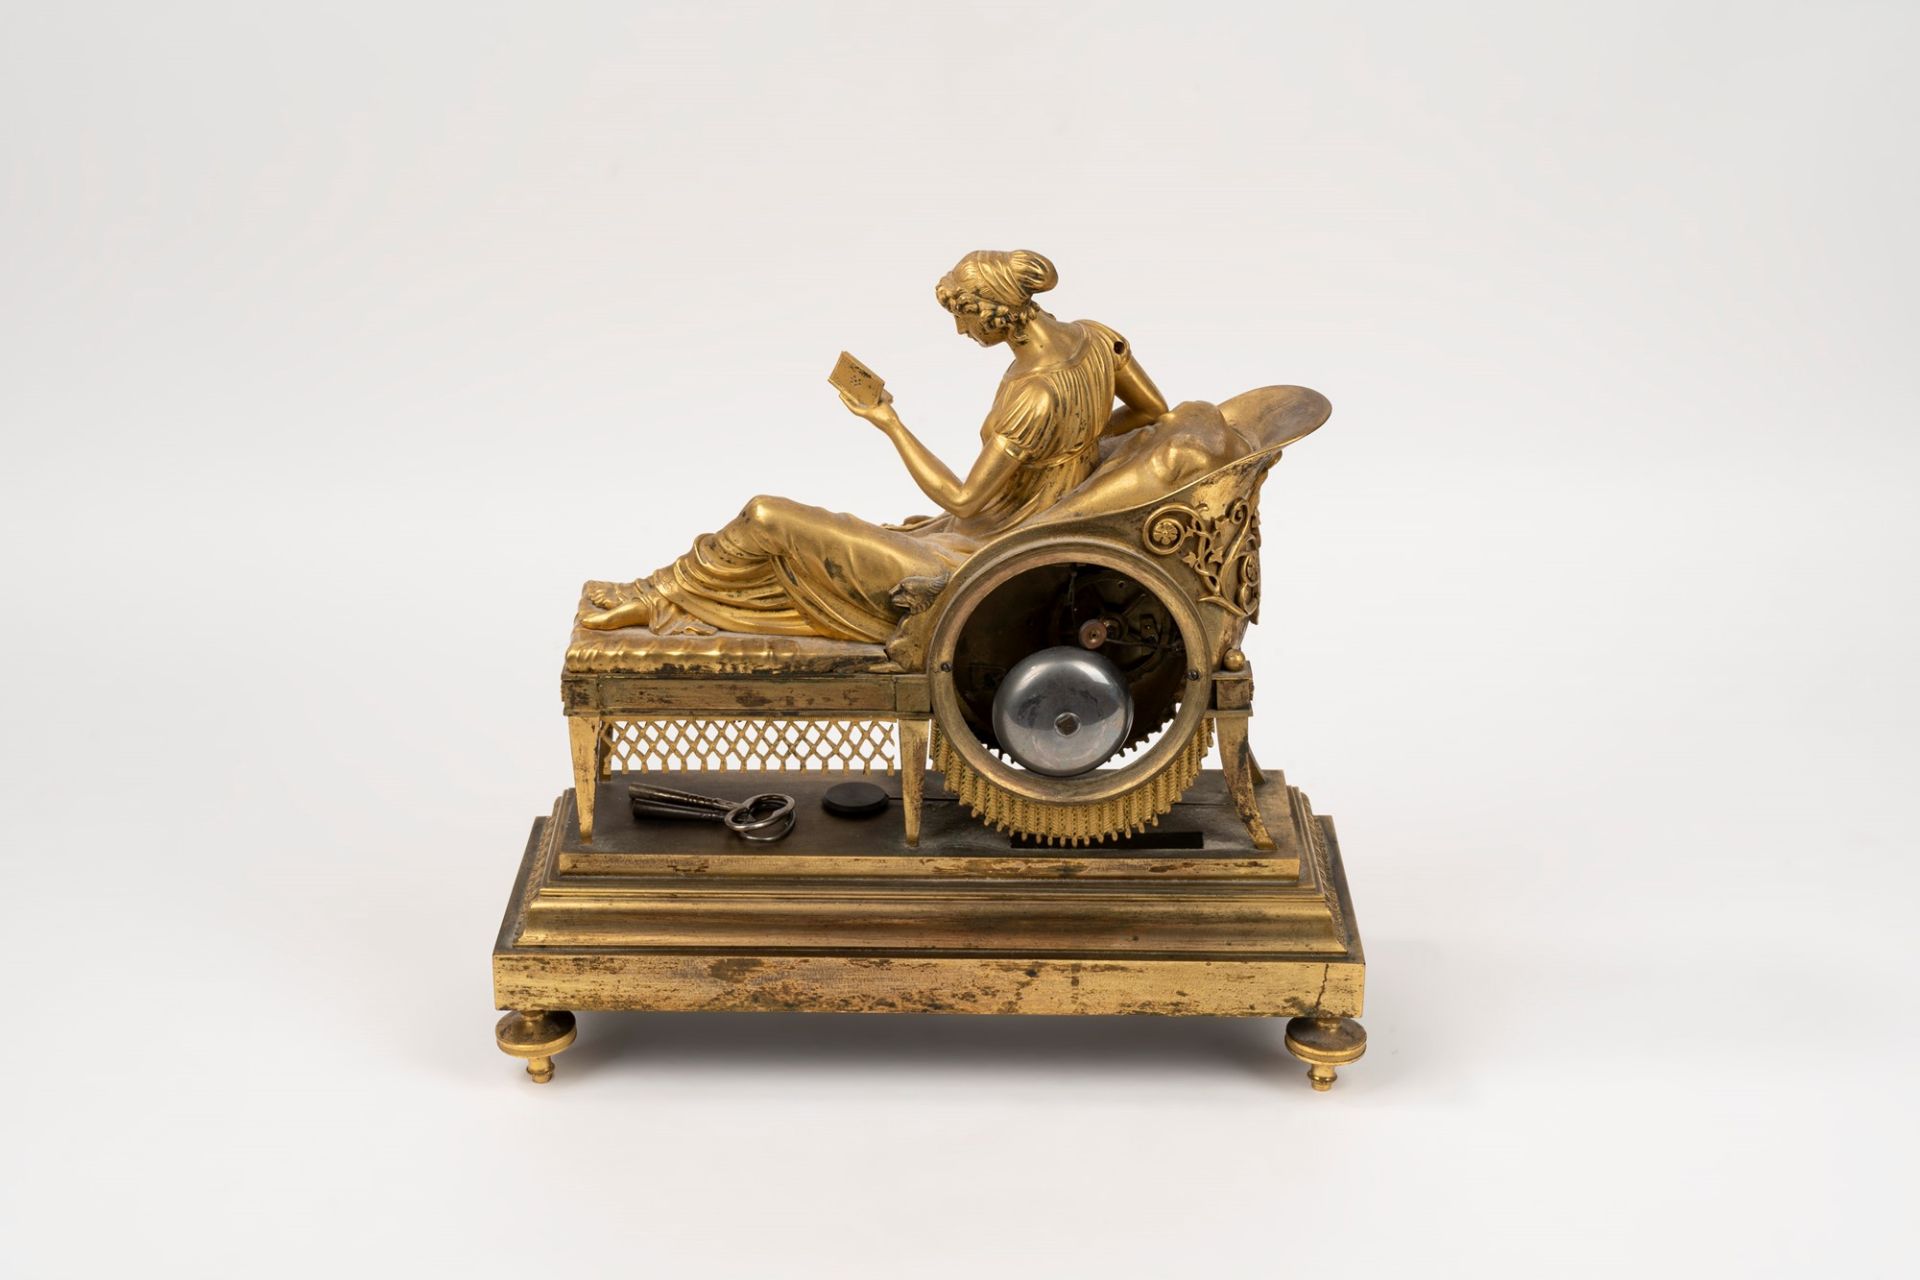 Empire clock in gilded bronze representing Madame Recamier reading, early 19th century - Image 2 of 4